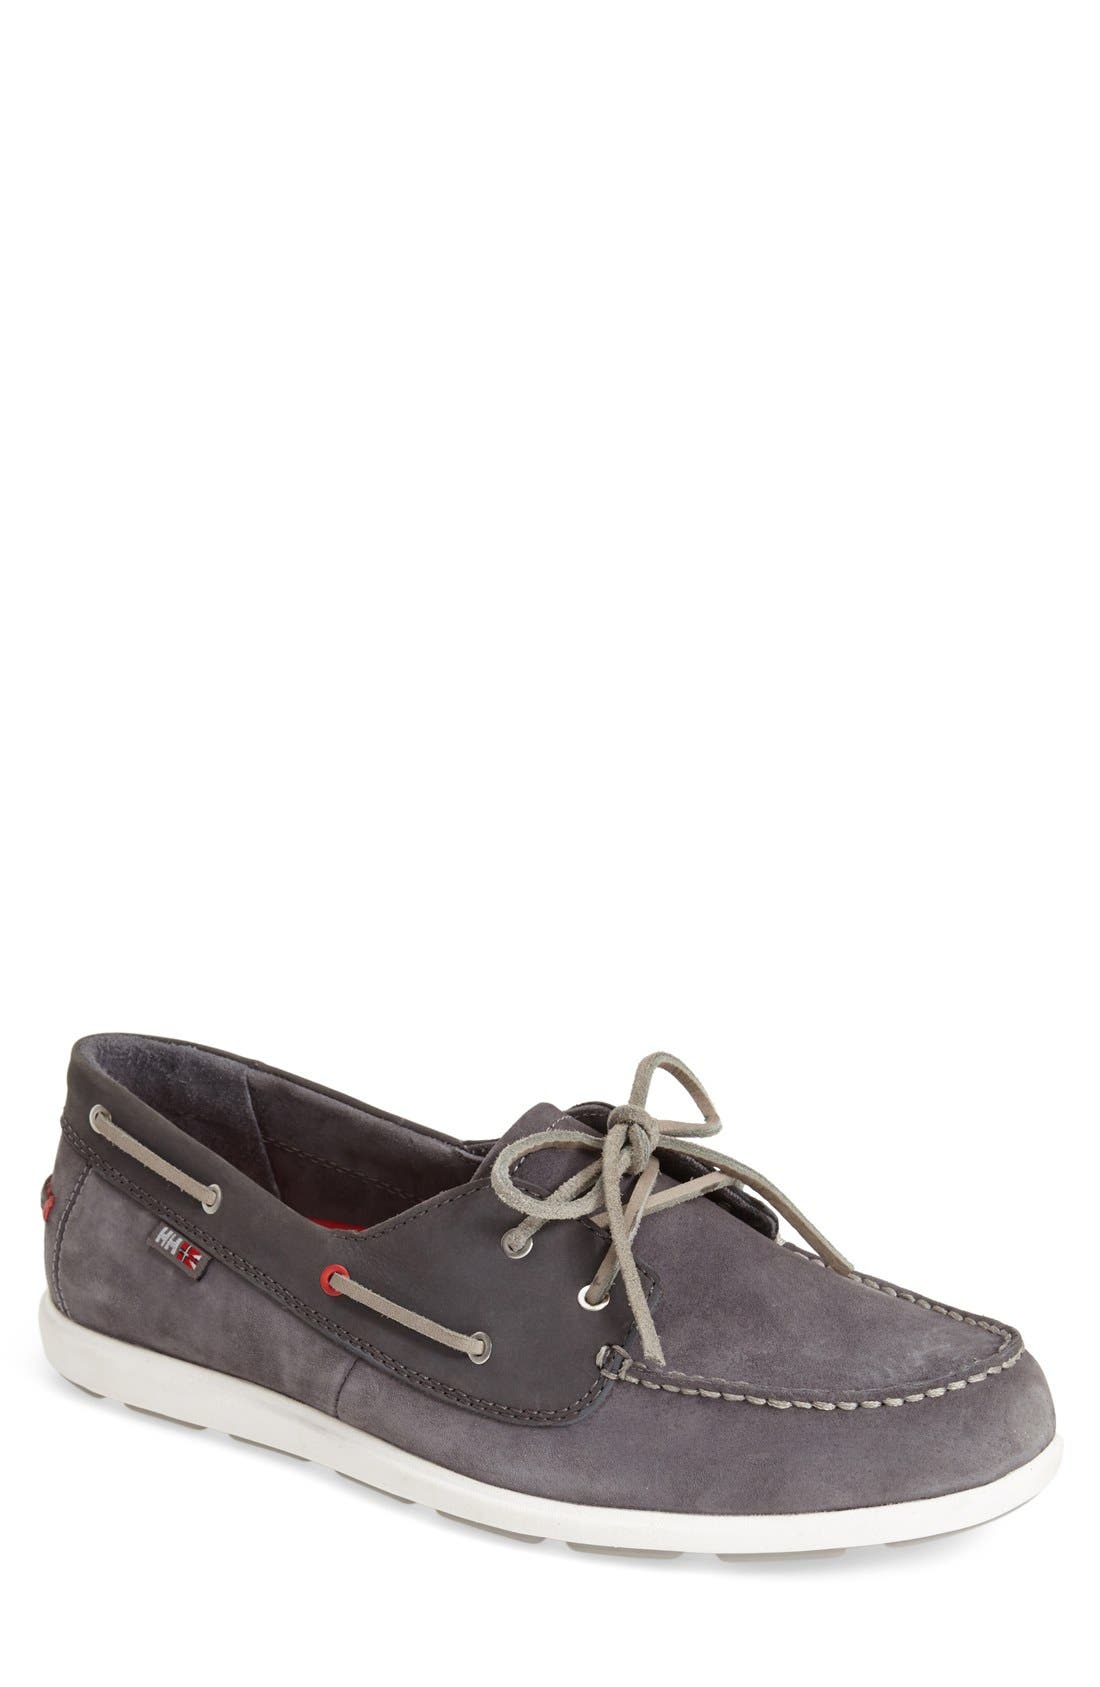 helly hansen boat shoes